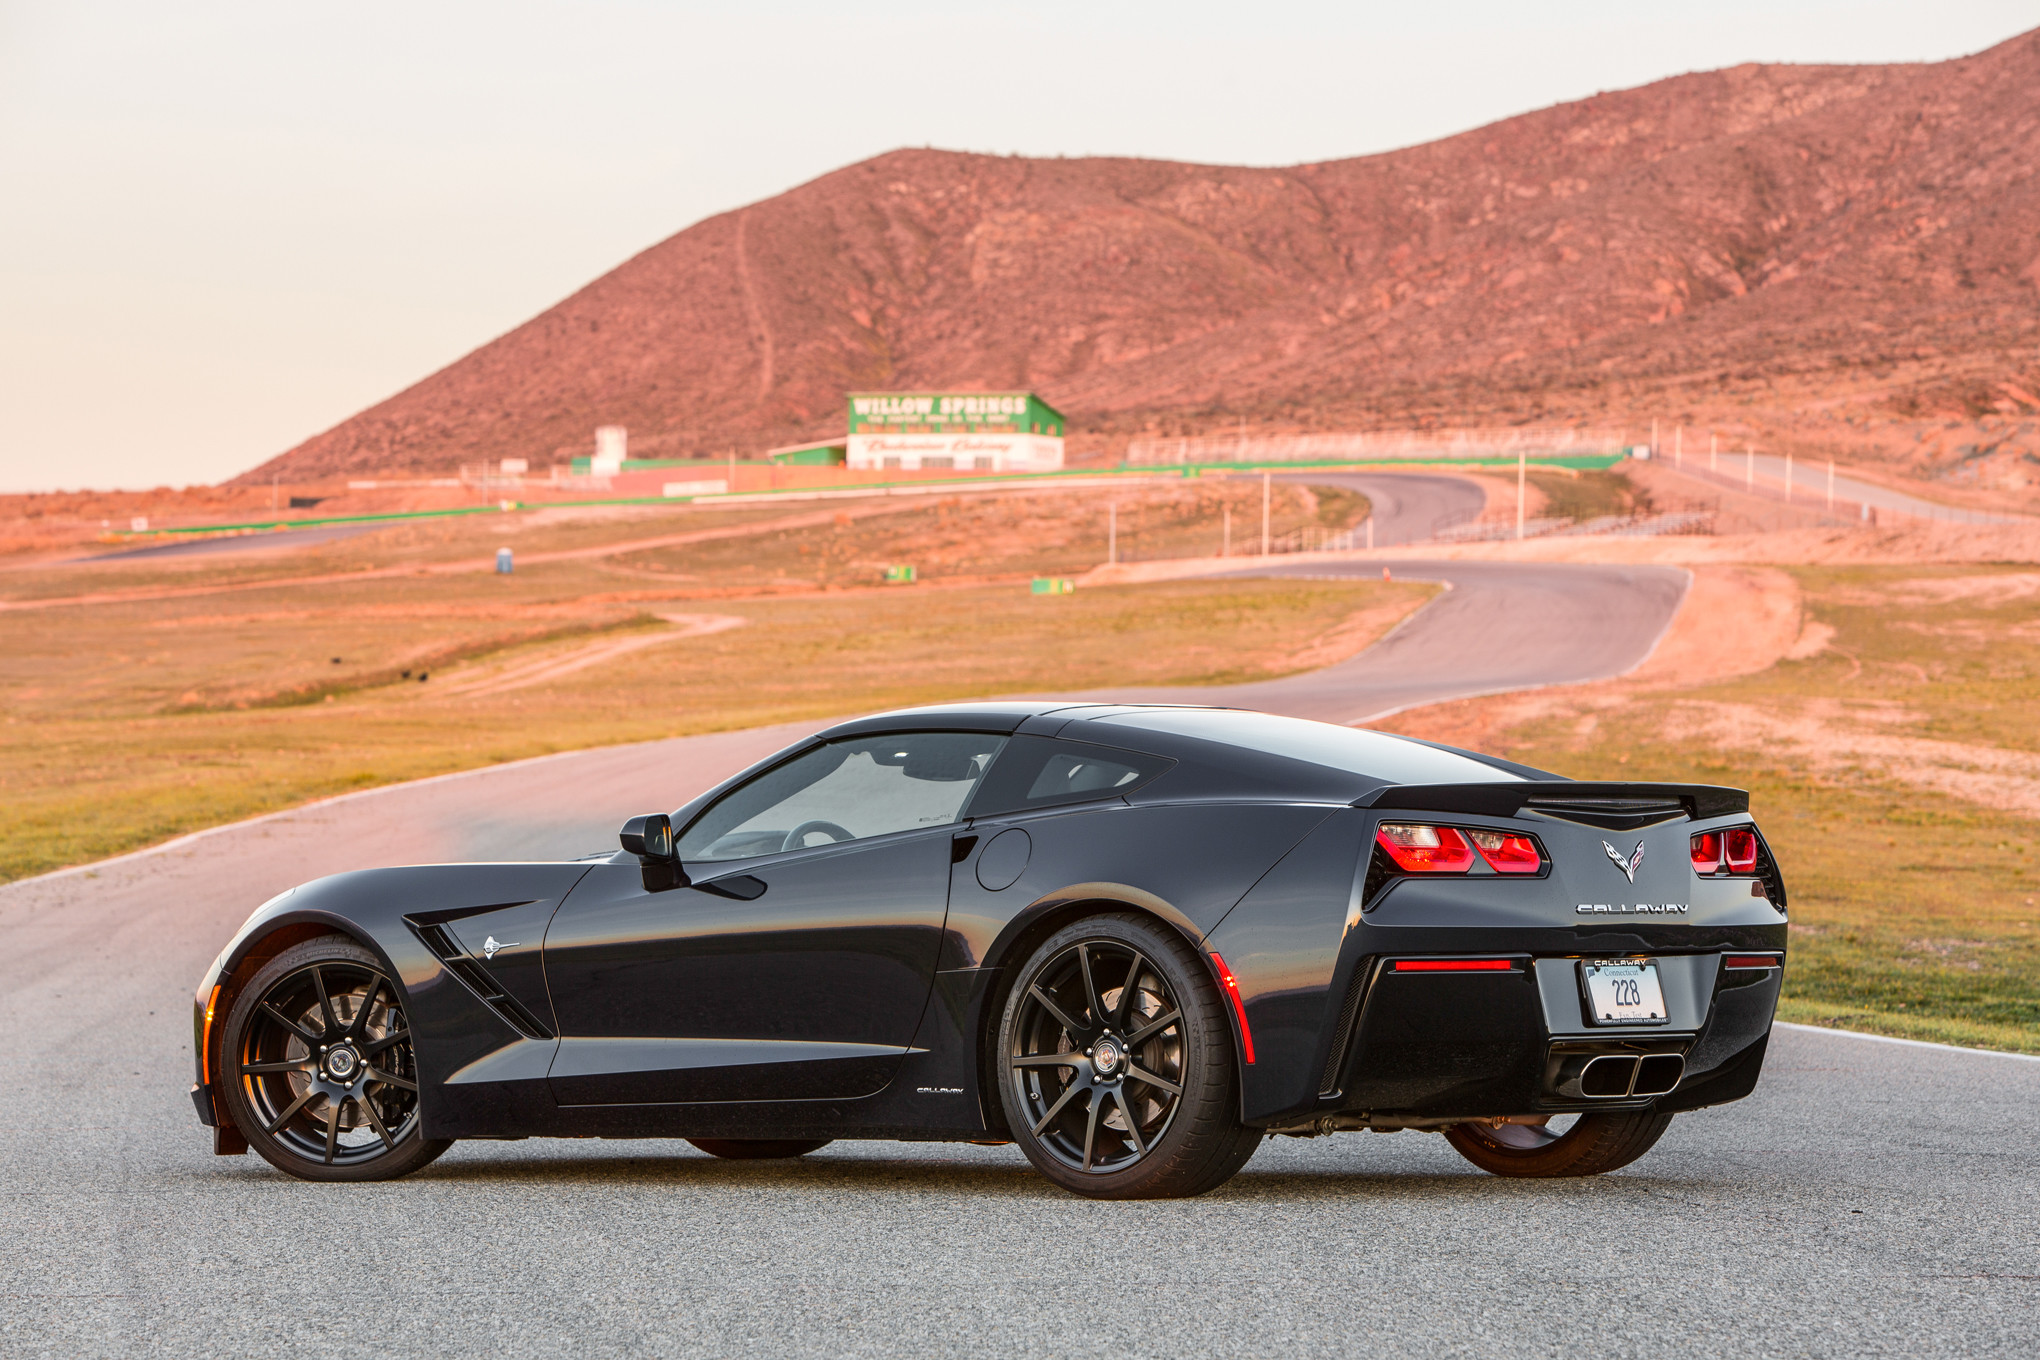 2040x1360 Motor Trend has tested the 2015 Callaway Chevrolet Corvette but how does it  compare to other Corvettes we've tested?